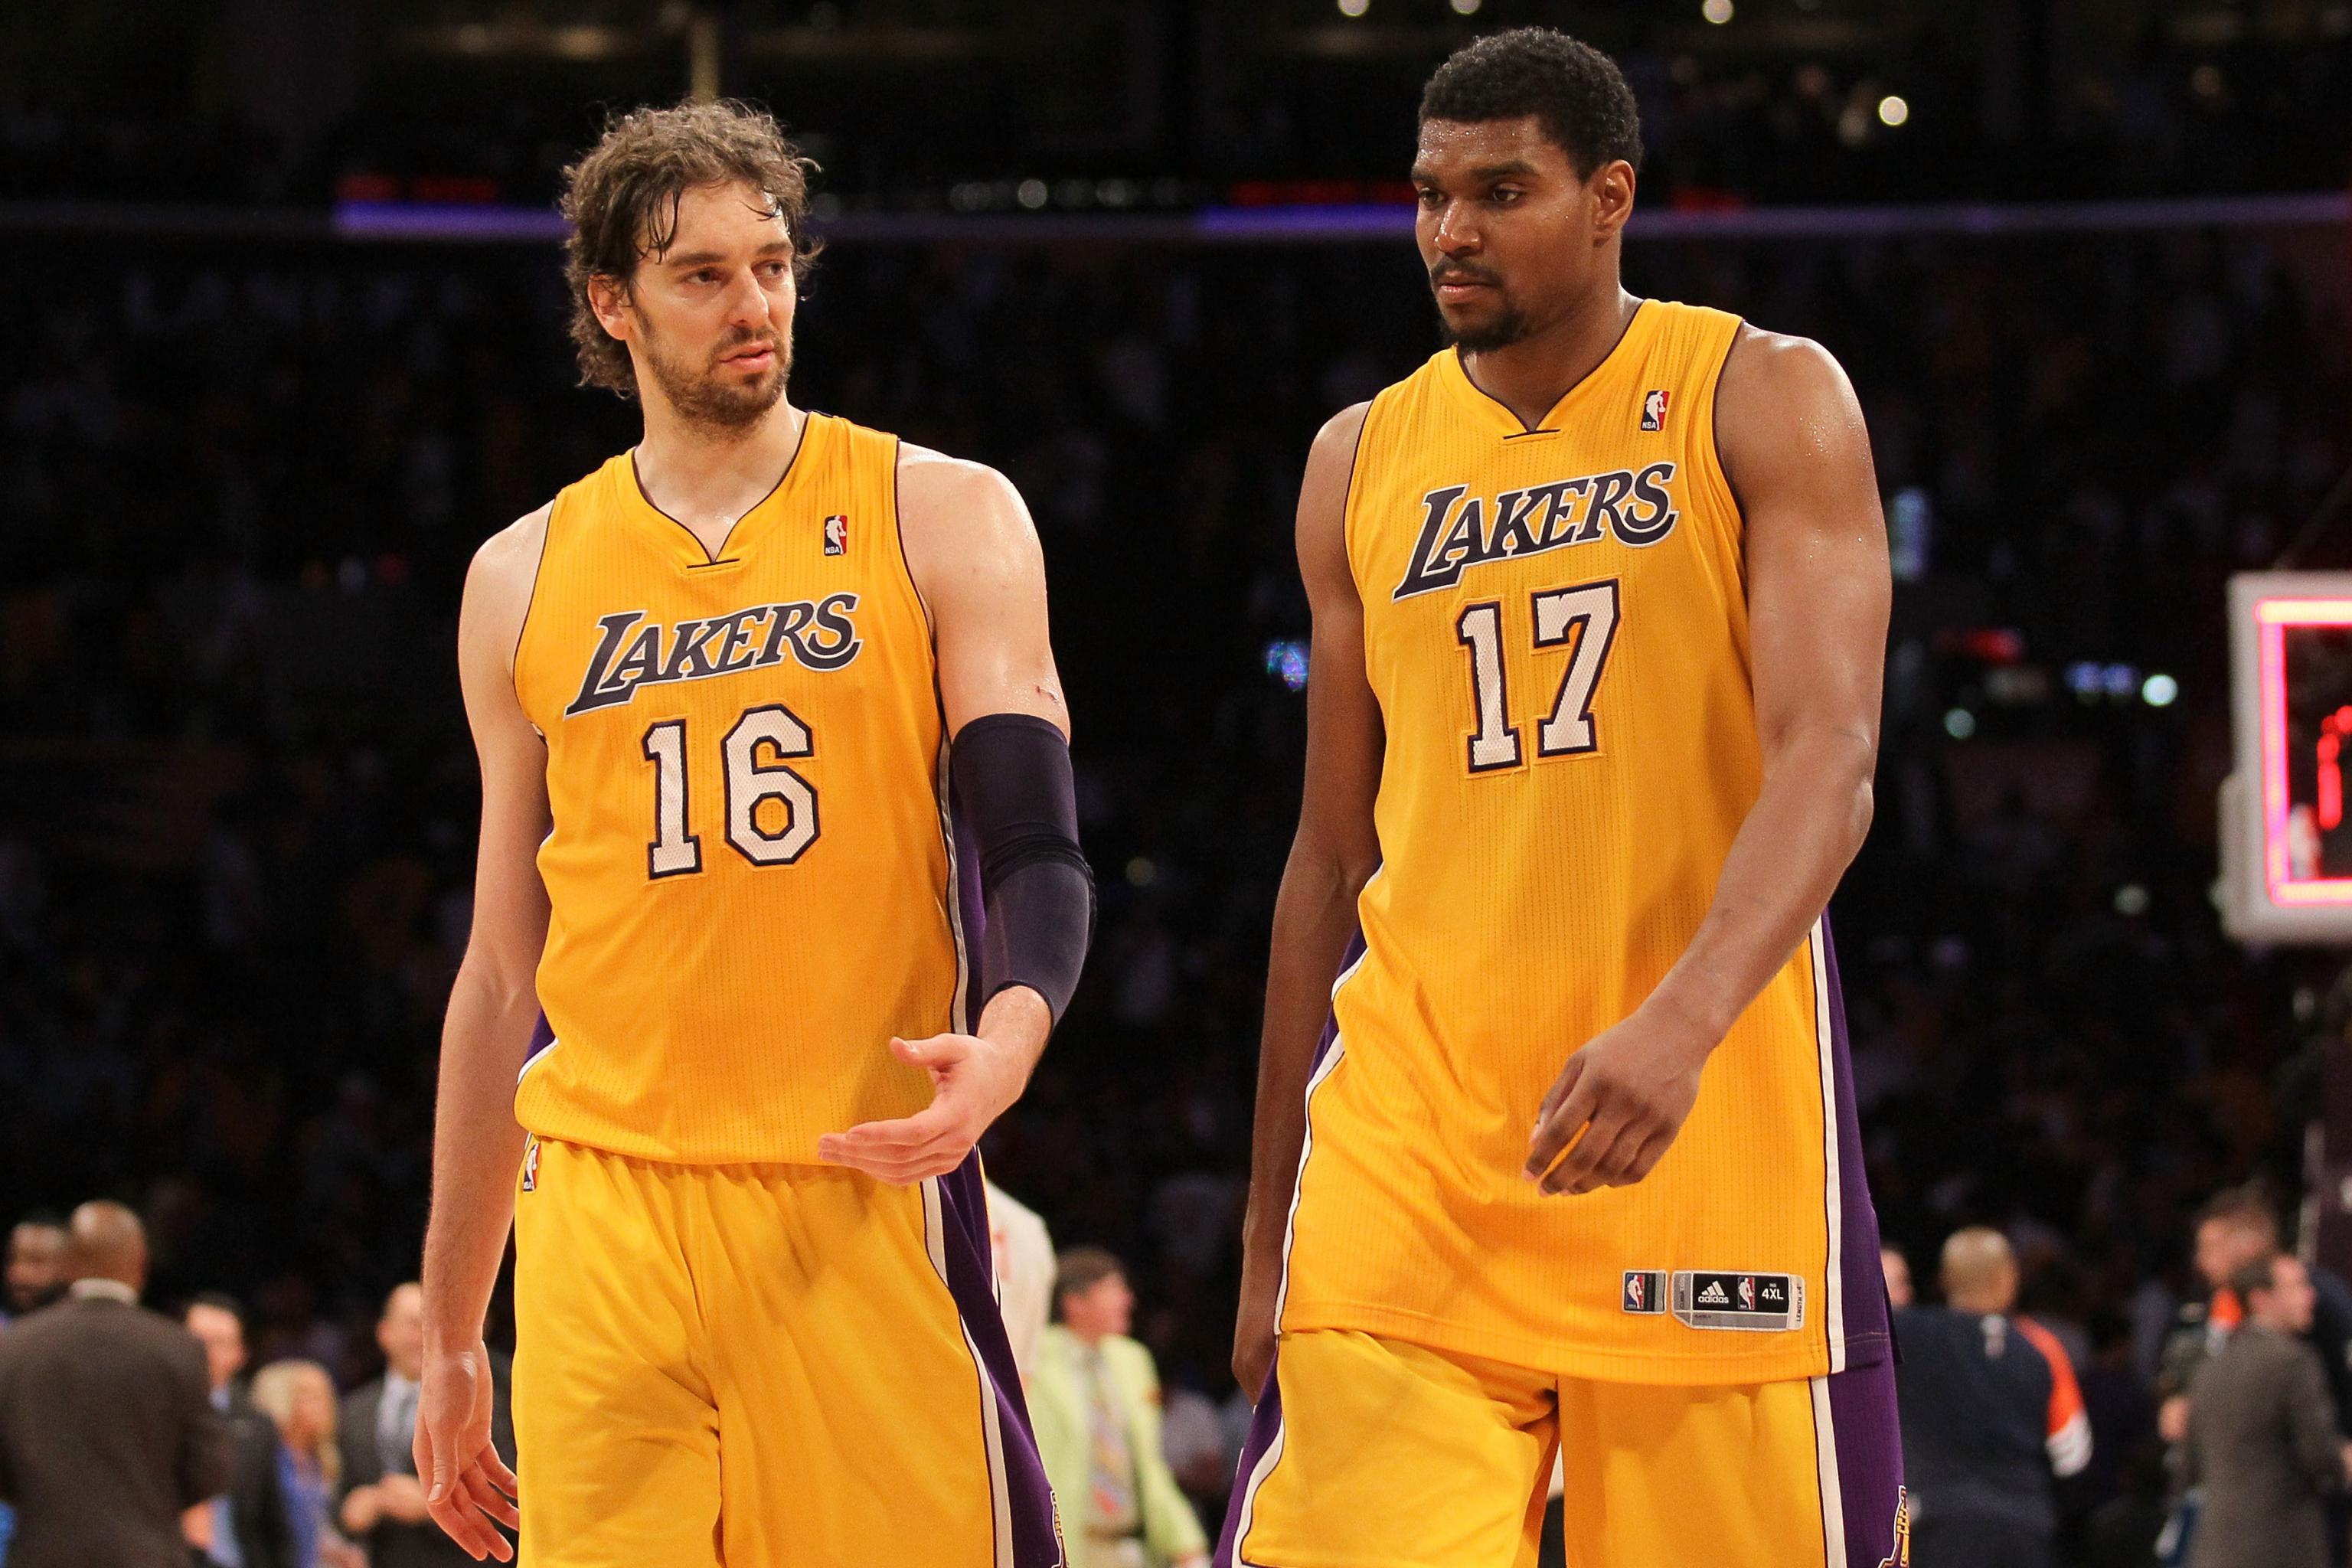 What Really Happened To Andrew Bynum? (HEARTBREAKING) 